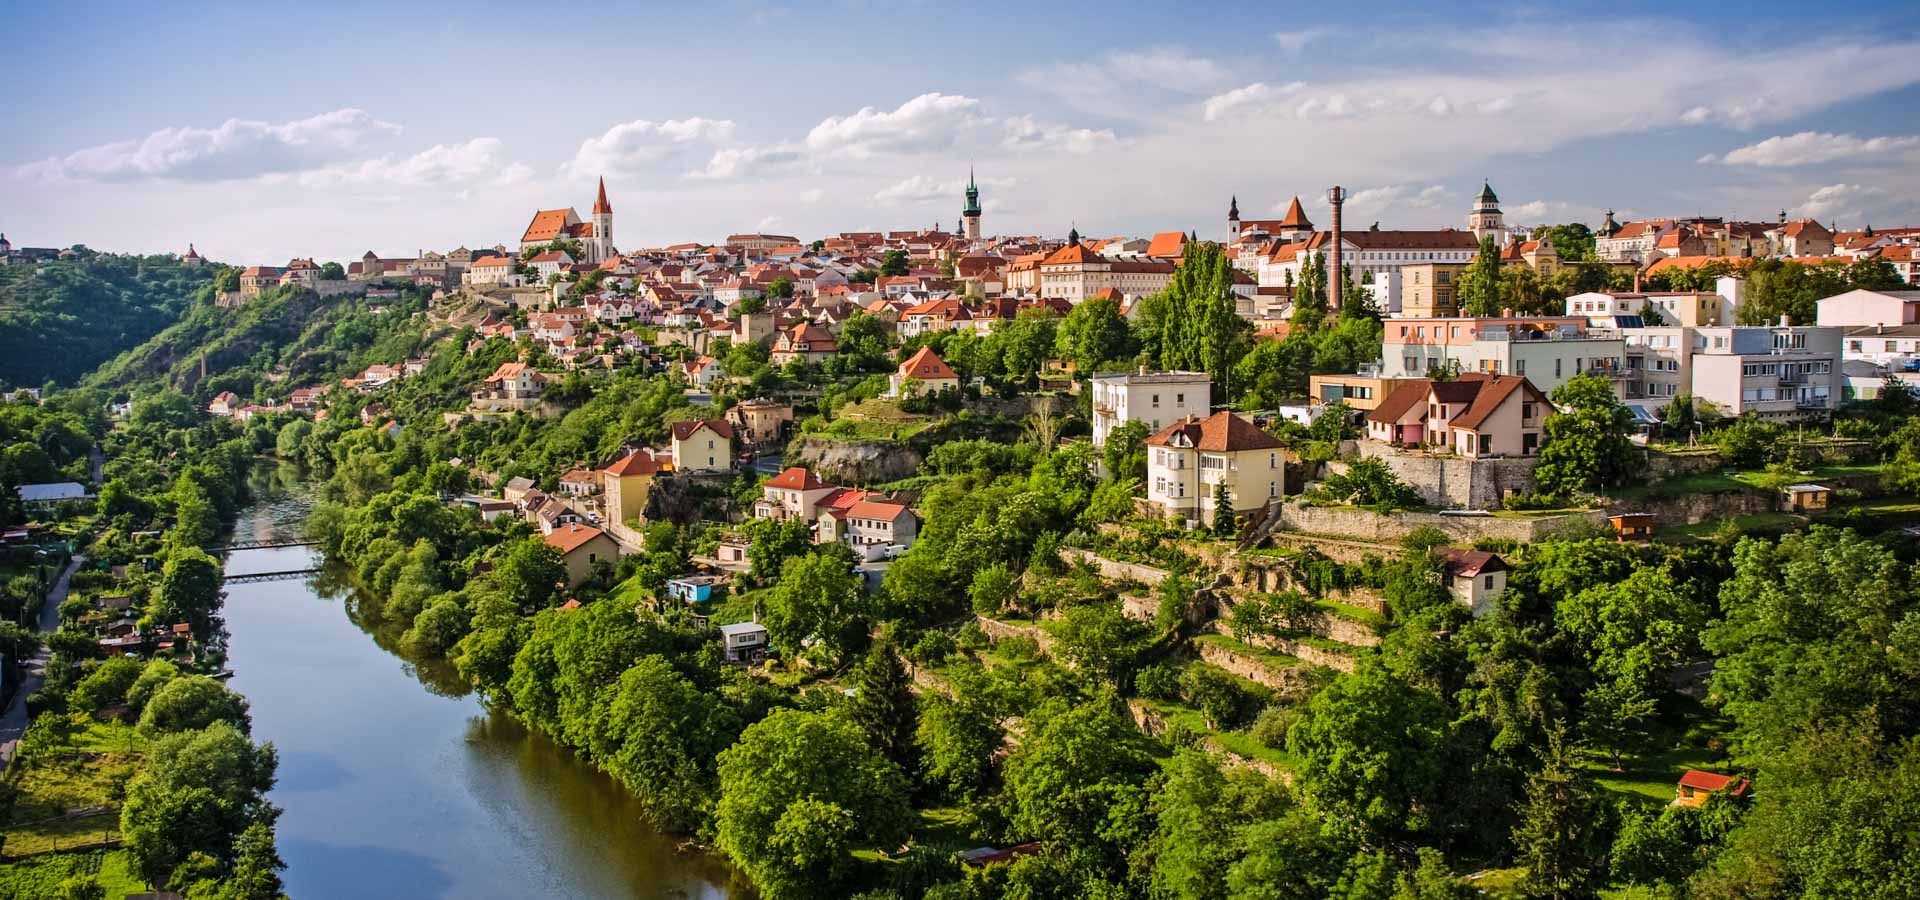 Czech Wine and Beer | Wine-Searcher